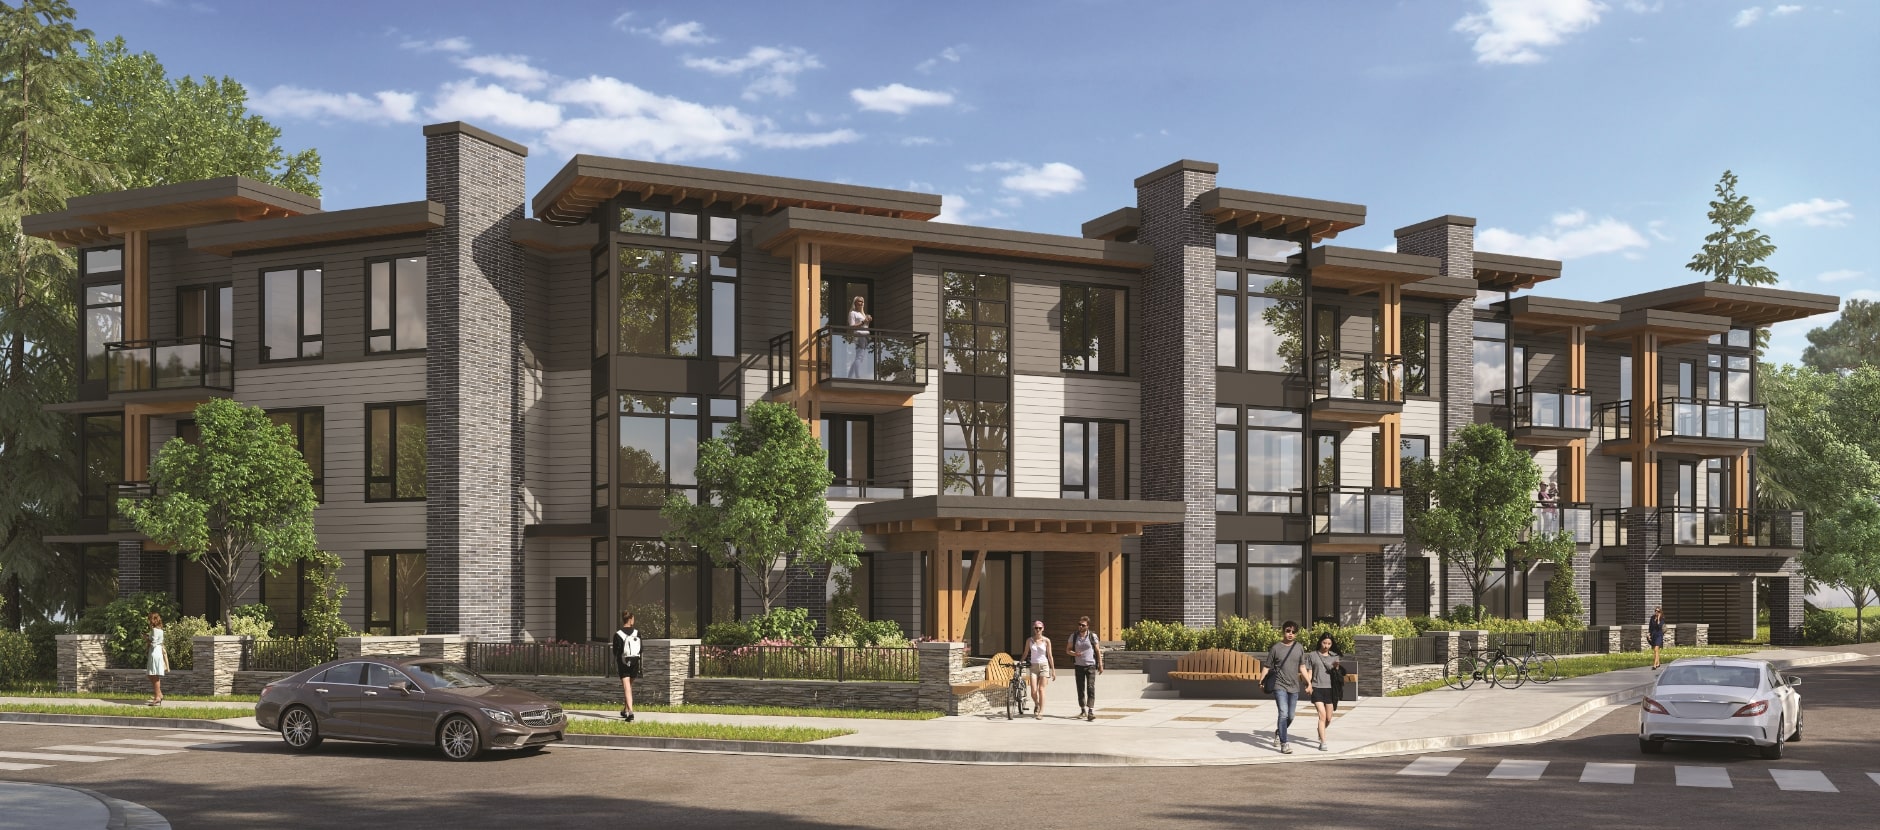 Crescentview at Edgemont by VPAC – Availability, Prices, Plans